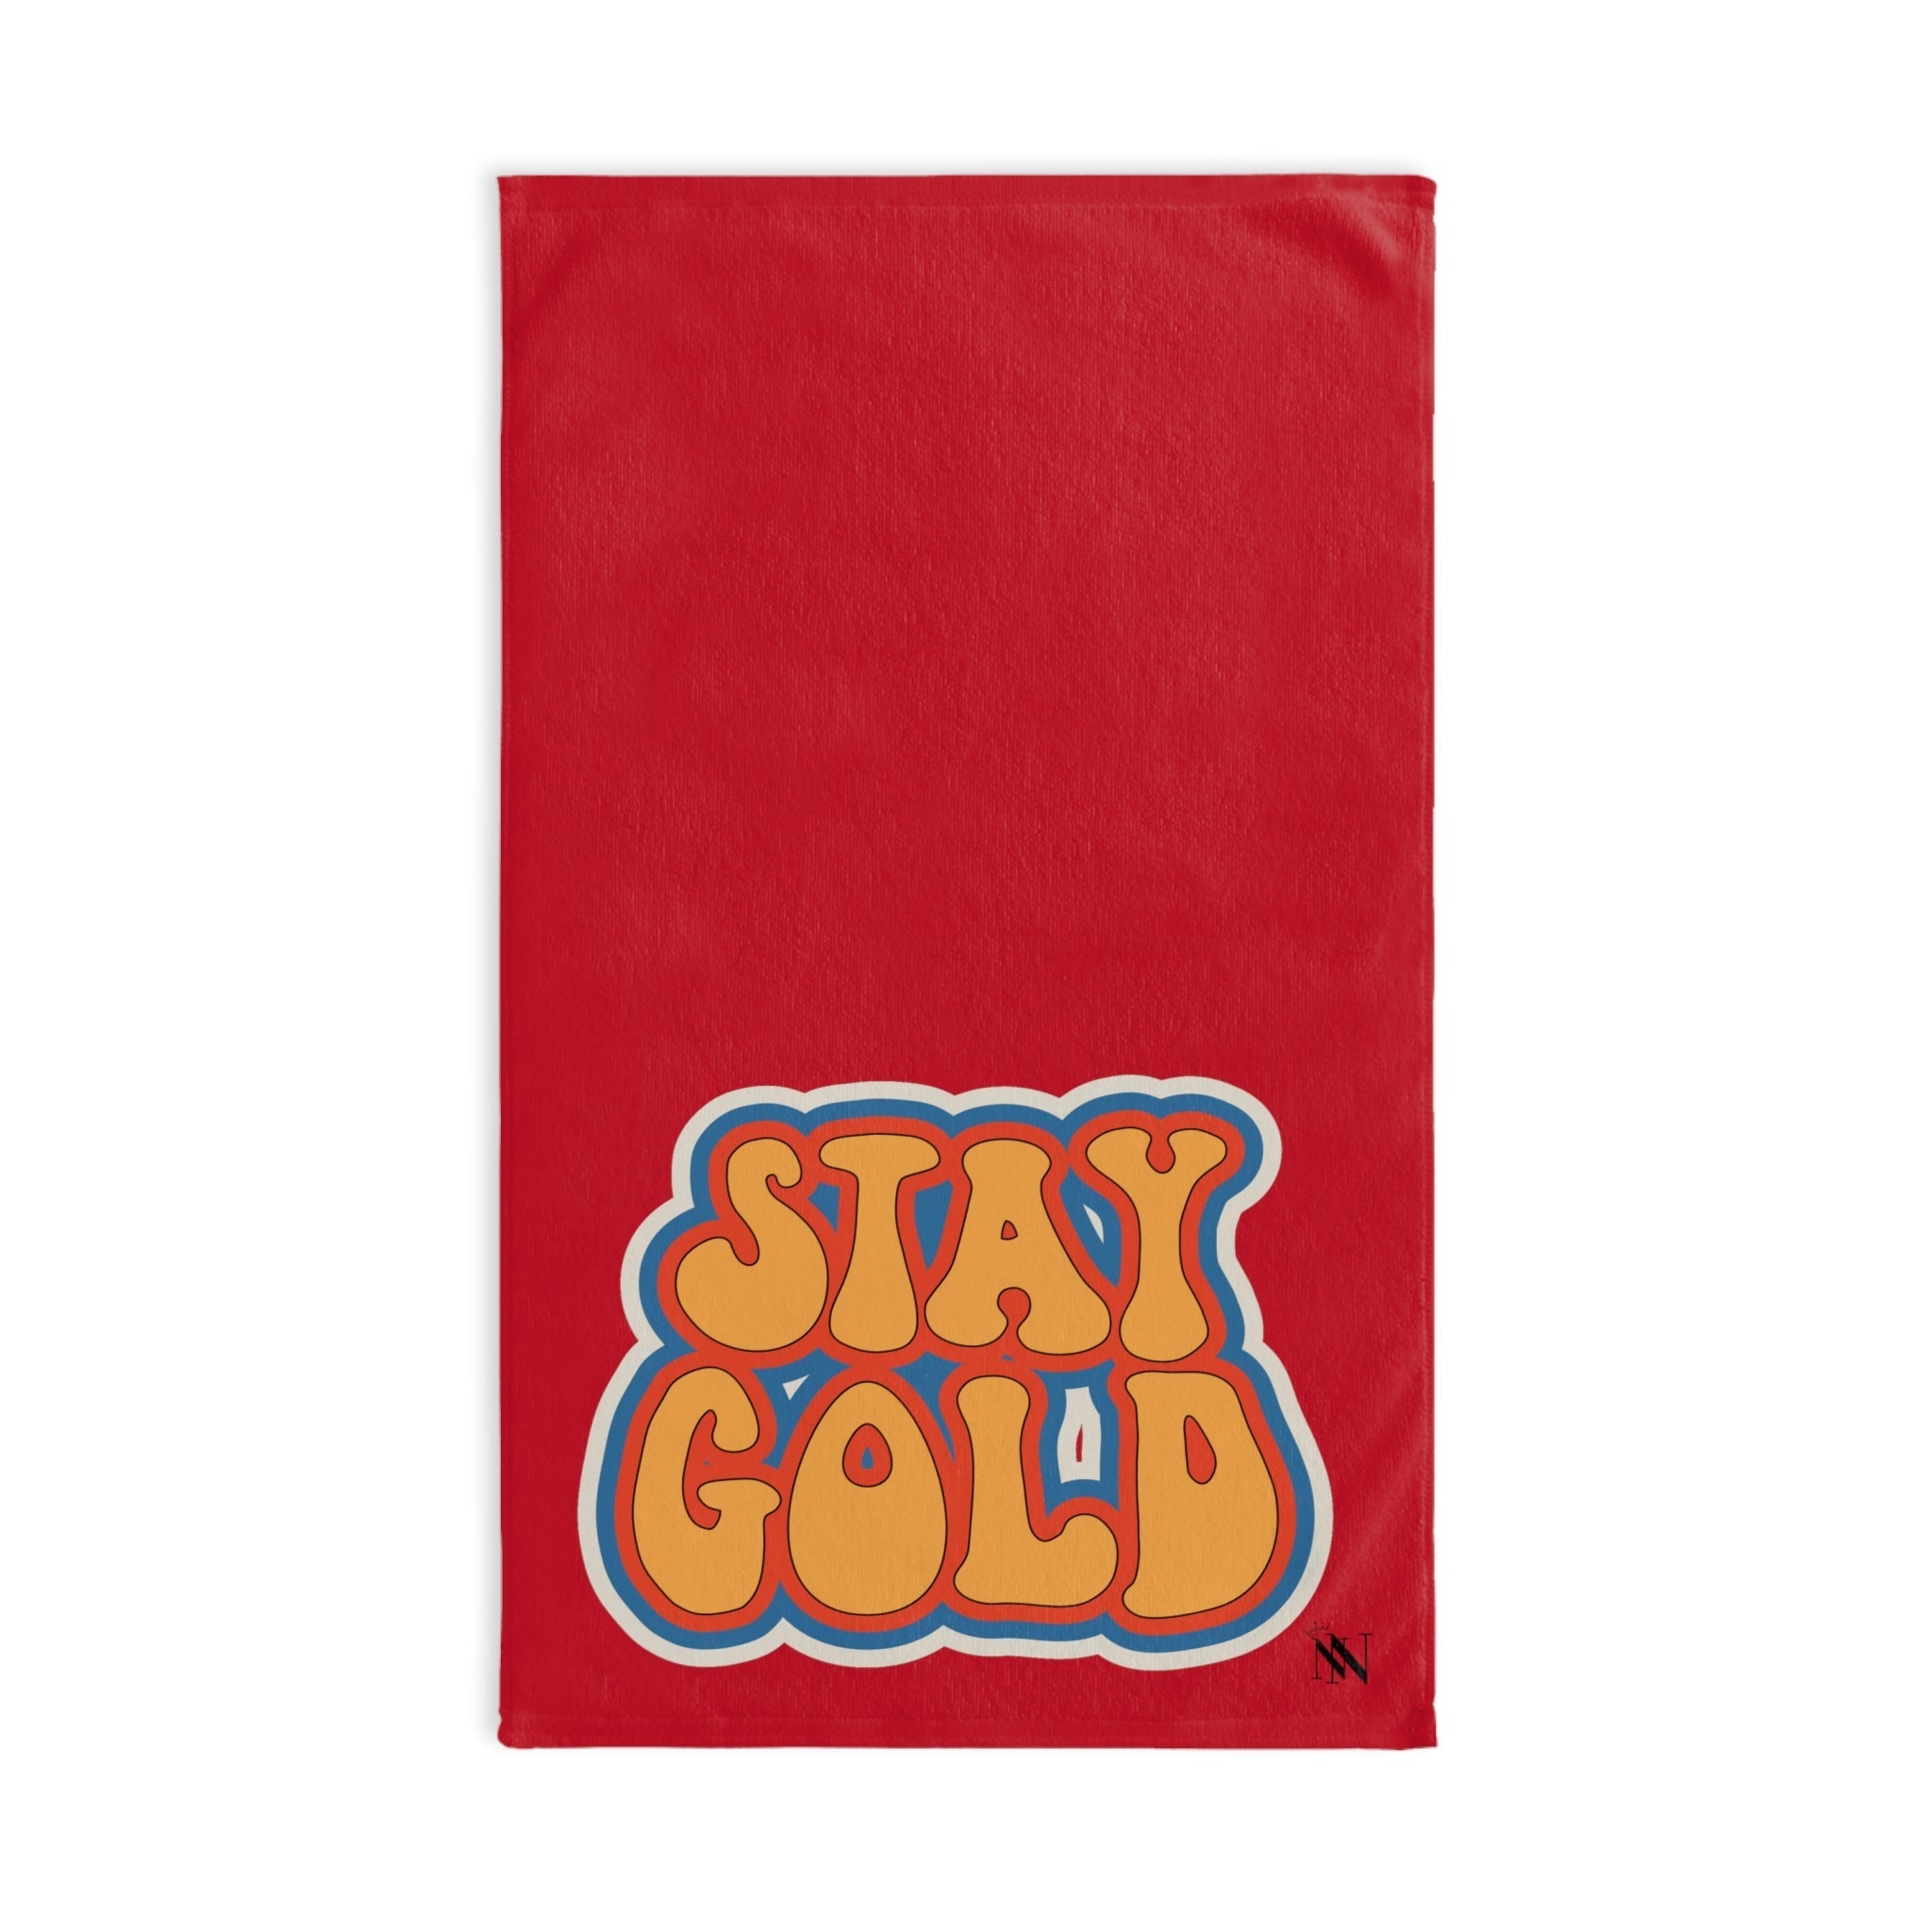 Stay Gold Retro Red | Sexy Gifts for Boyfriend, Funny Towel Romantic Gift for Wedding Couple Fiance First Year 2nd Anniversary Valentines, Party Gag Gifts, Joke Humor Cloth for Husband Men BF NECTAR NAPKINS